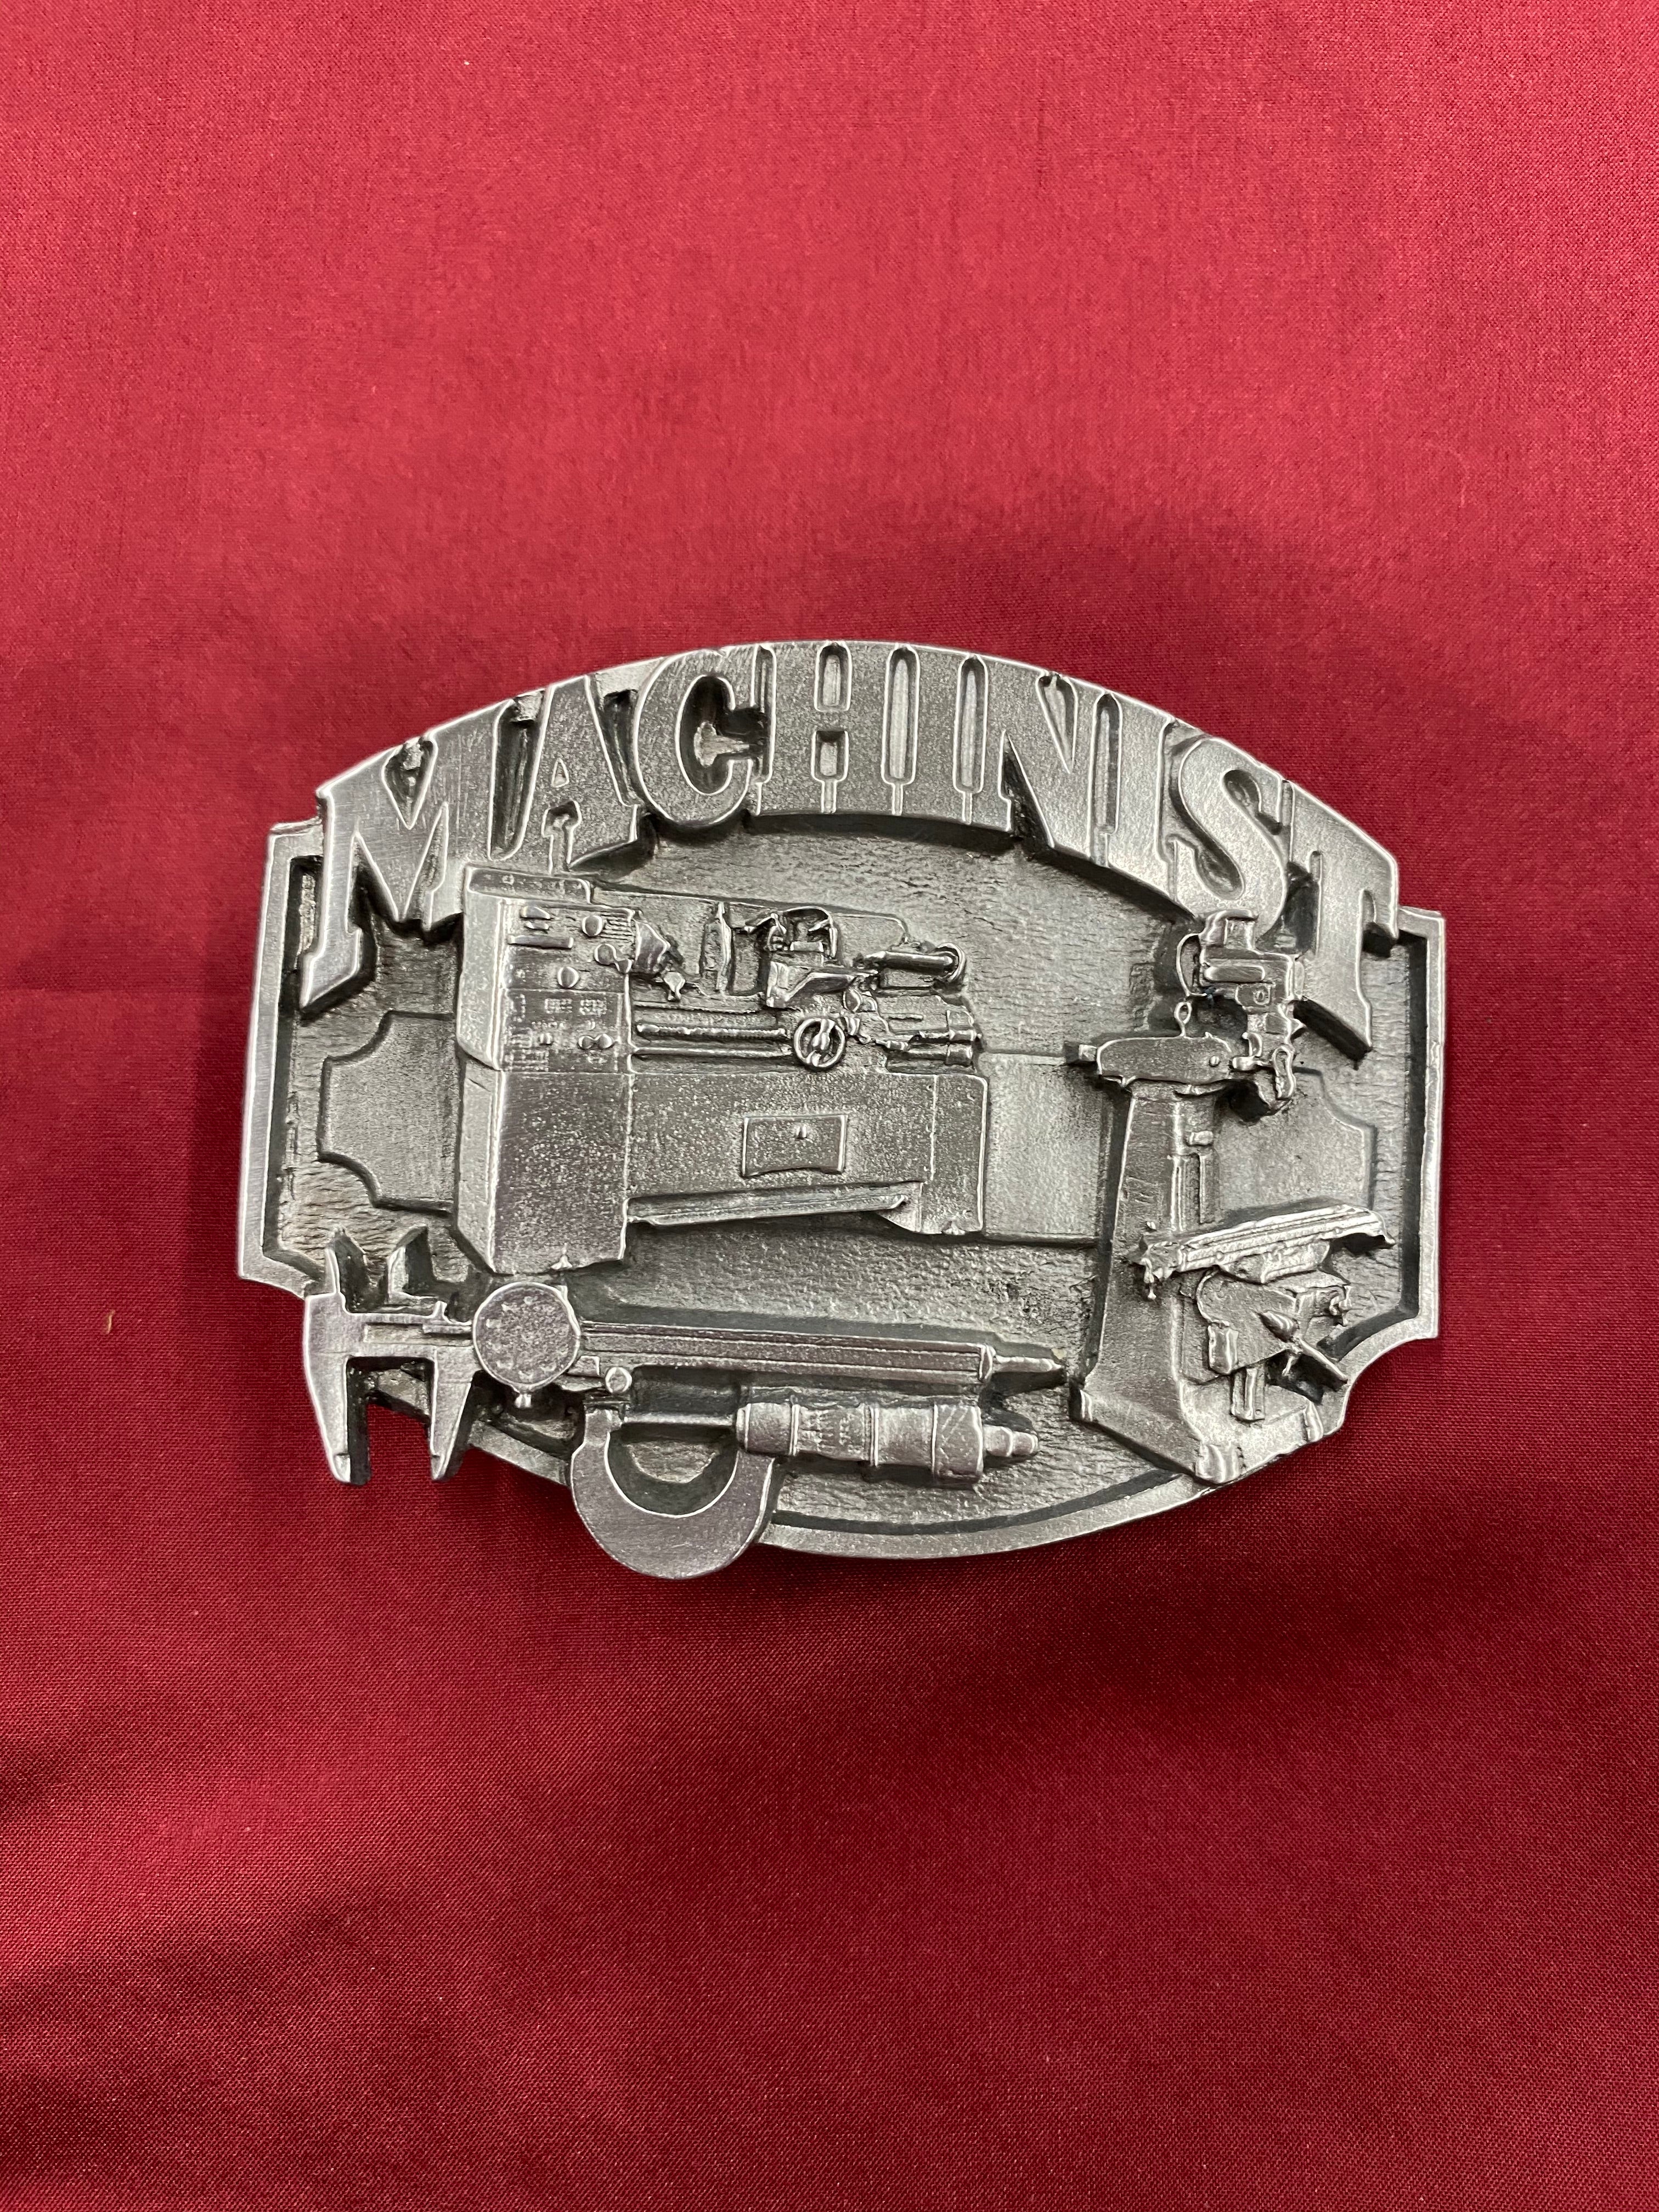 MAJOR IMPORTS MACHINIST BUCKLE